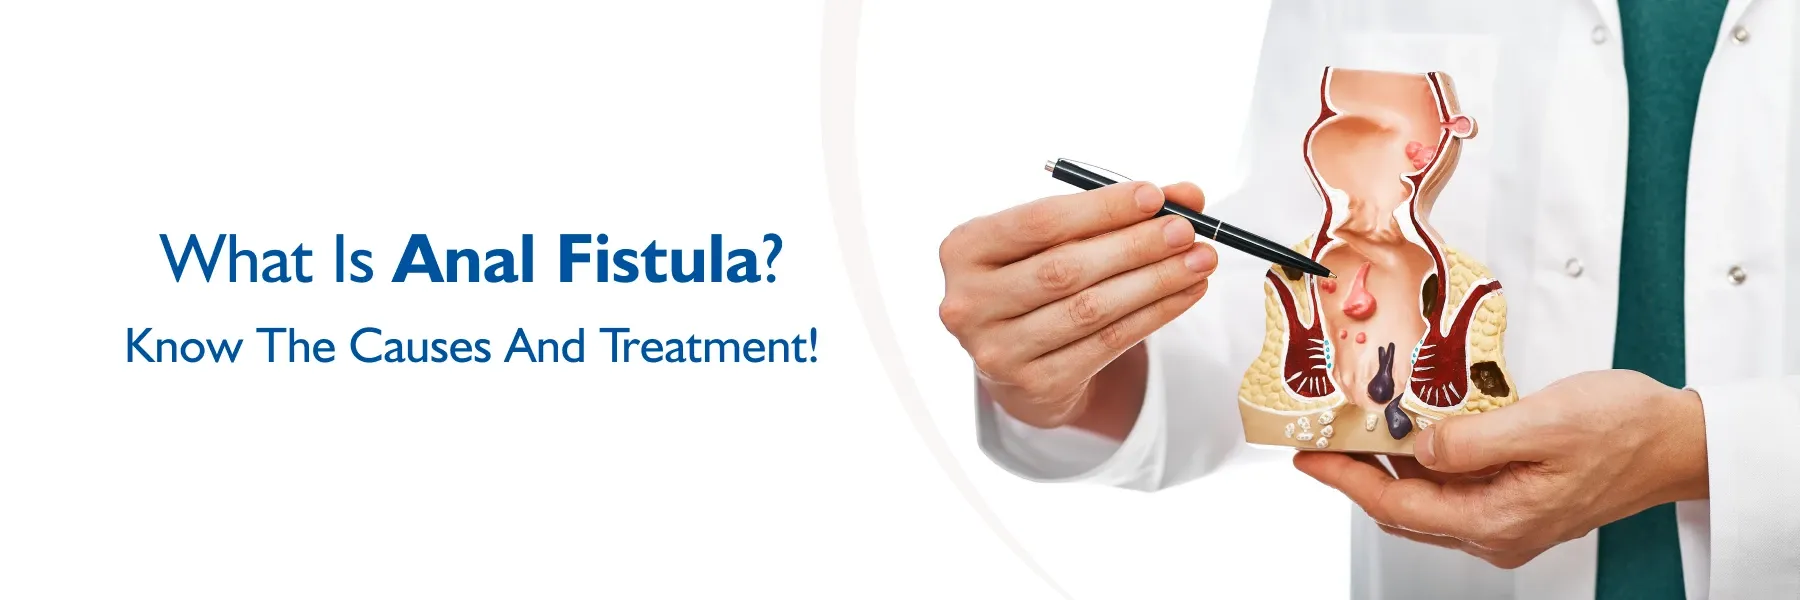 What is Anal Fistula Causes, Symptoms and Treatment